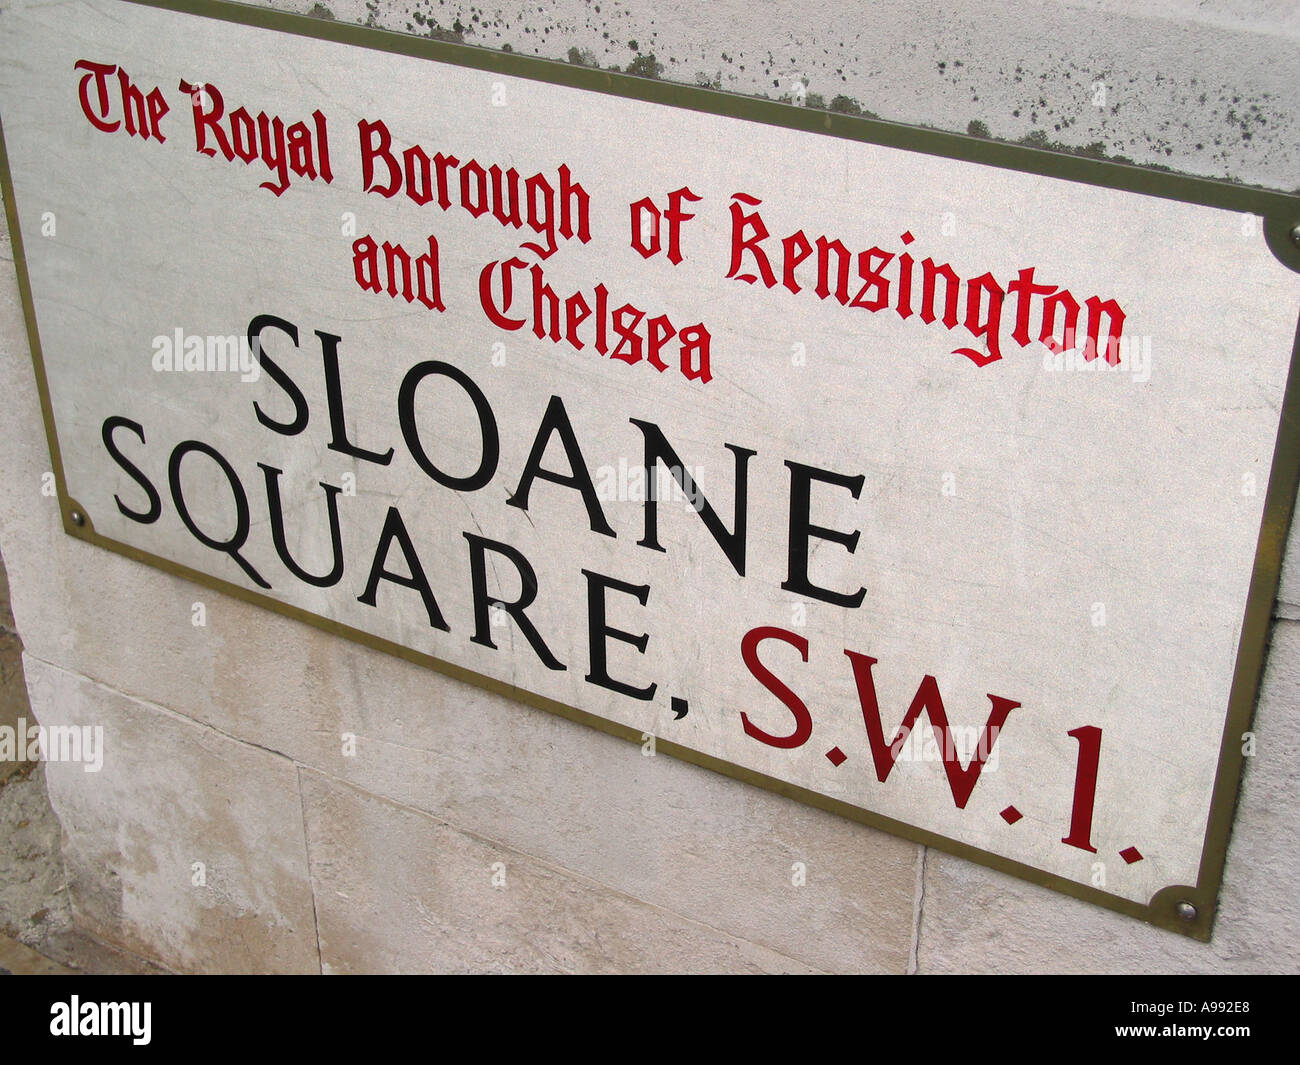 Sloane Square, Luxury and High-End Fashion Shopping area, Royal Borough of Kensington and Chelsea in South London, SW1, England, United Kingdom Stock Photo